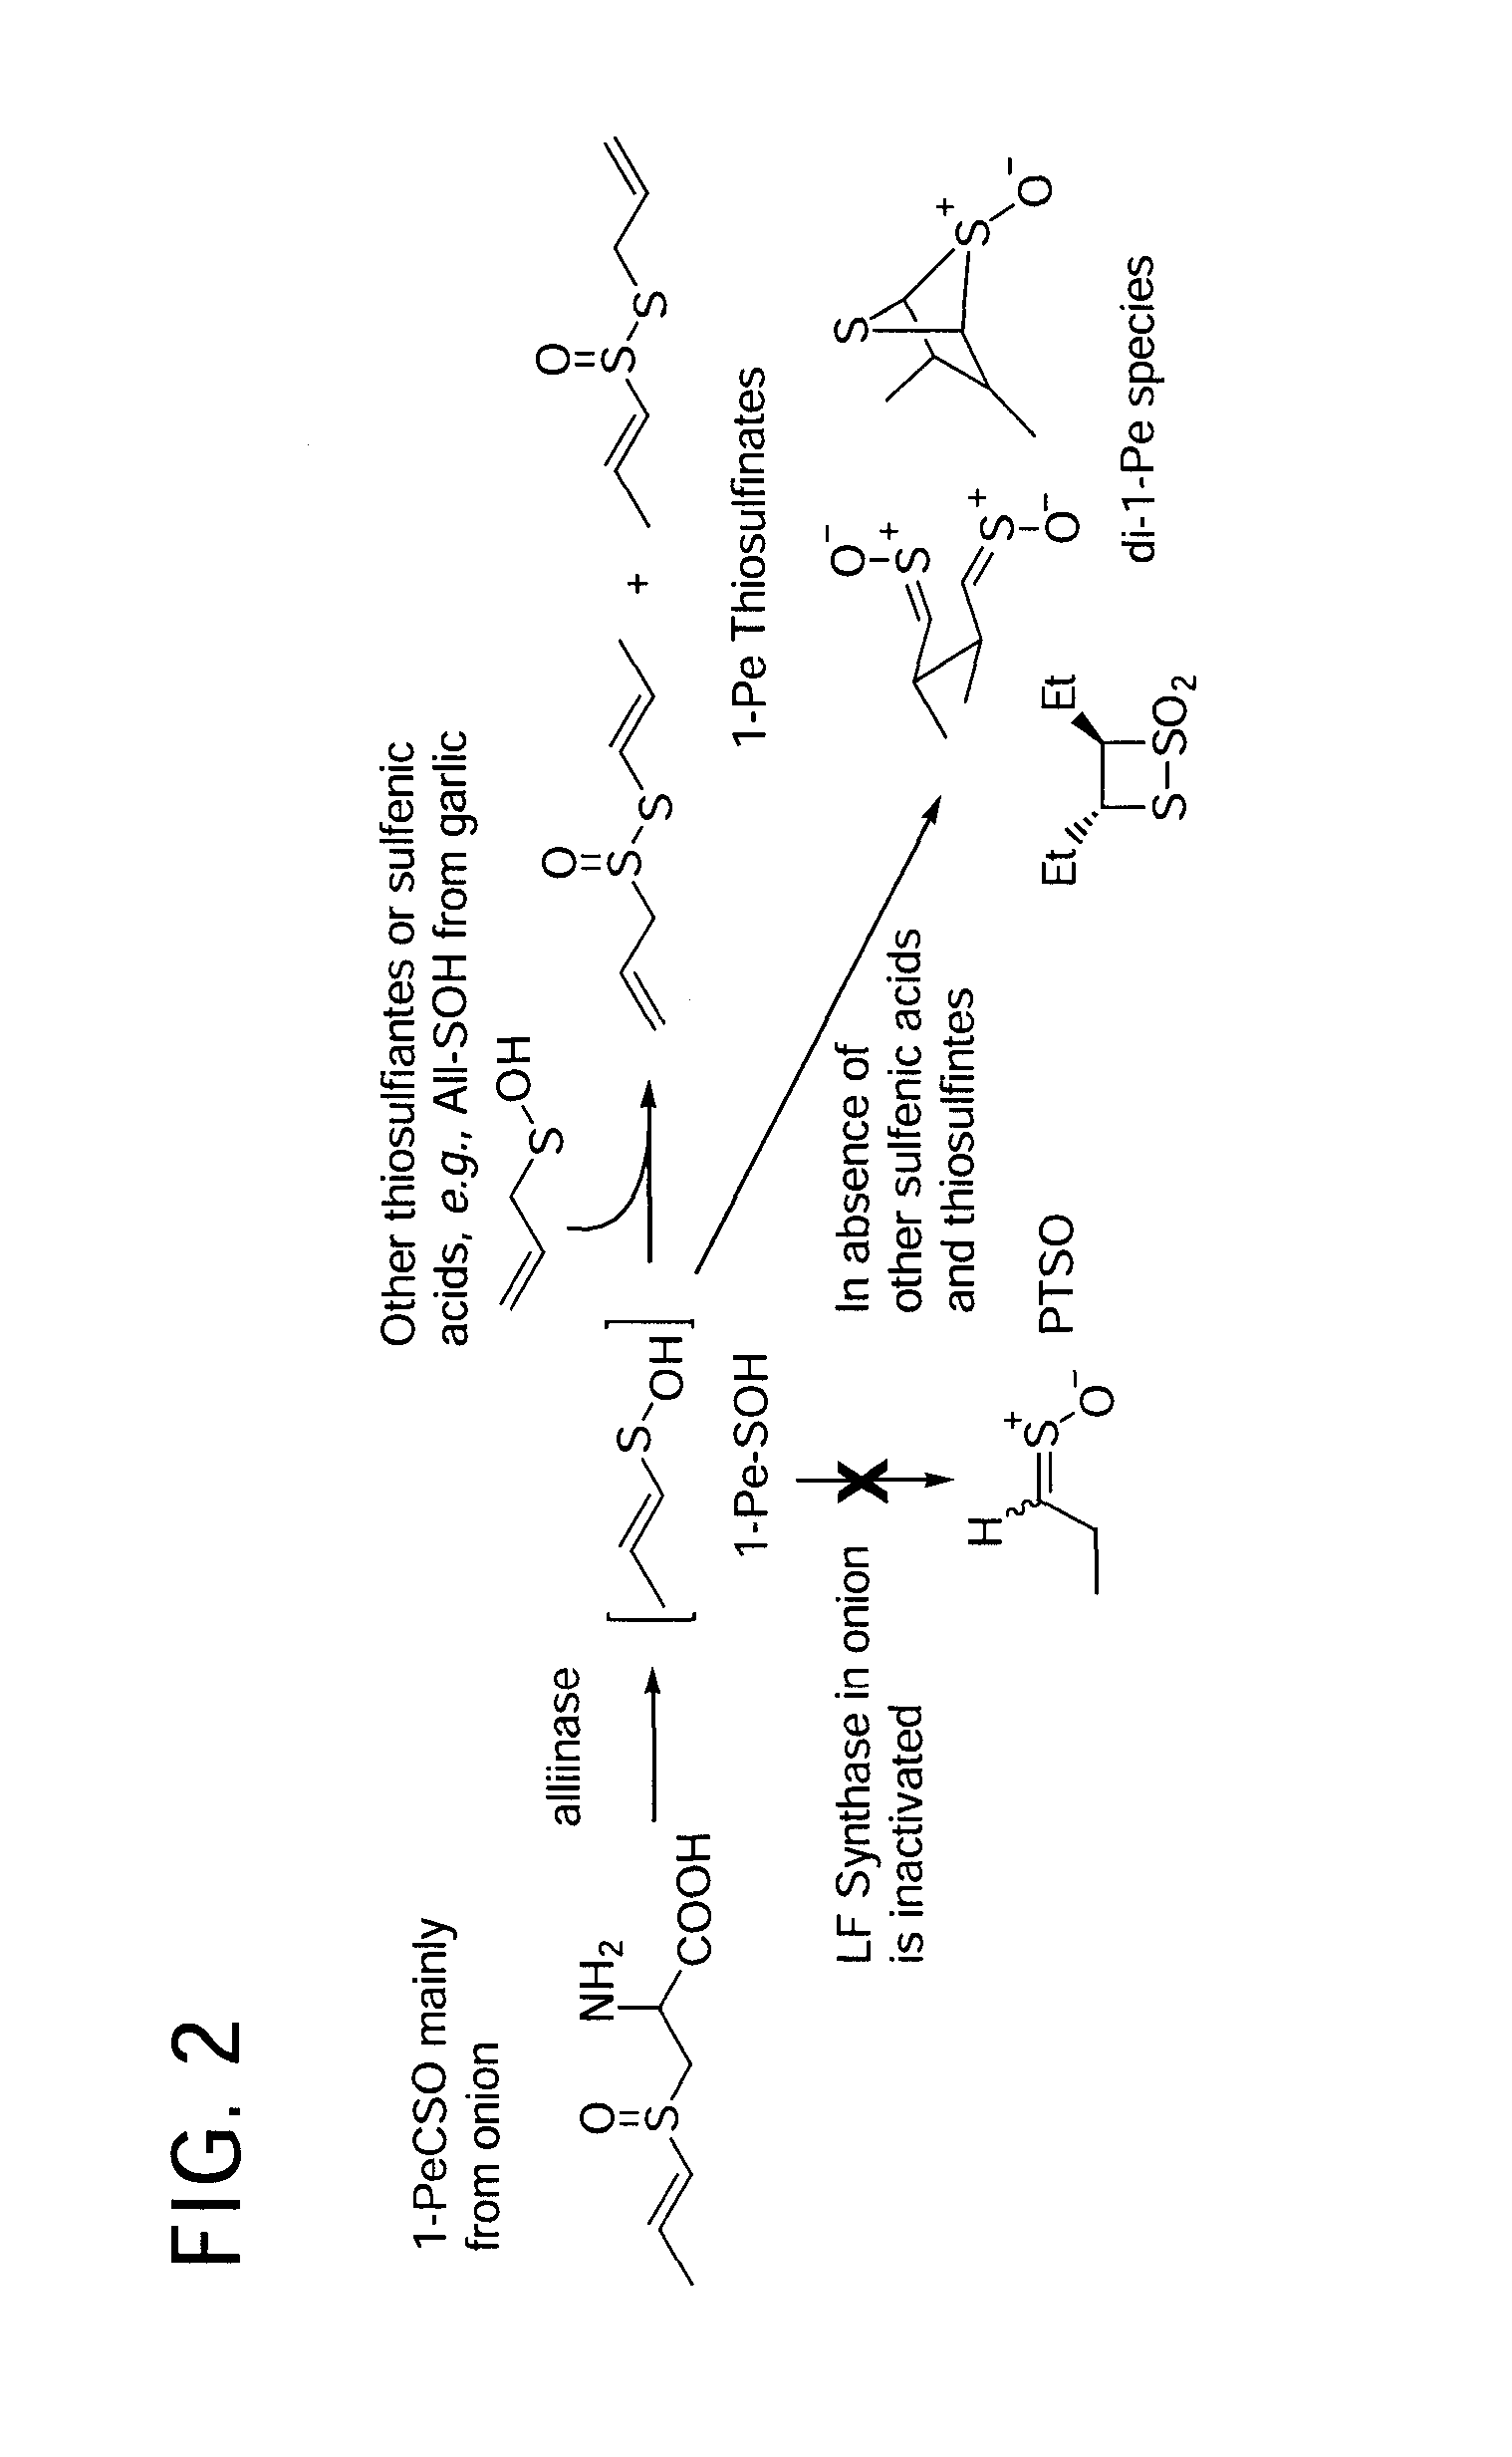 Process of preparing conjugates of allium organosulfur compounds with amino acids, peptides, and proteins